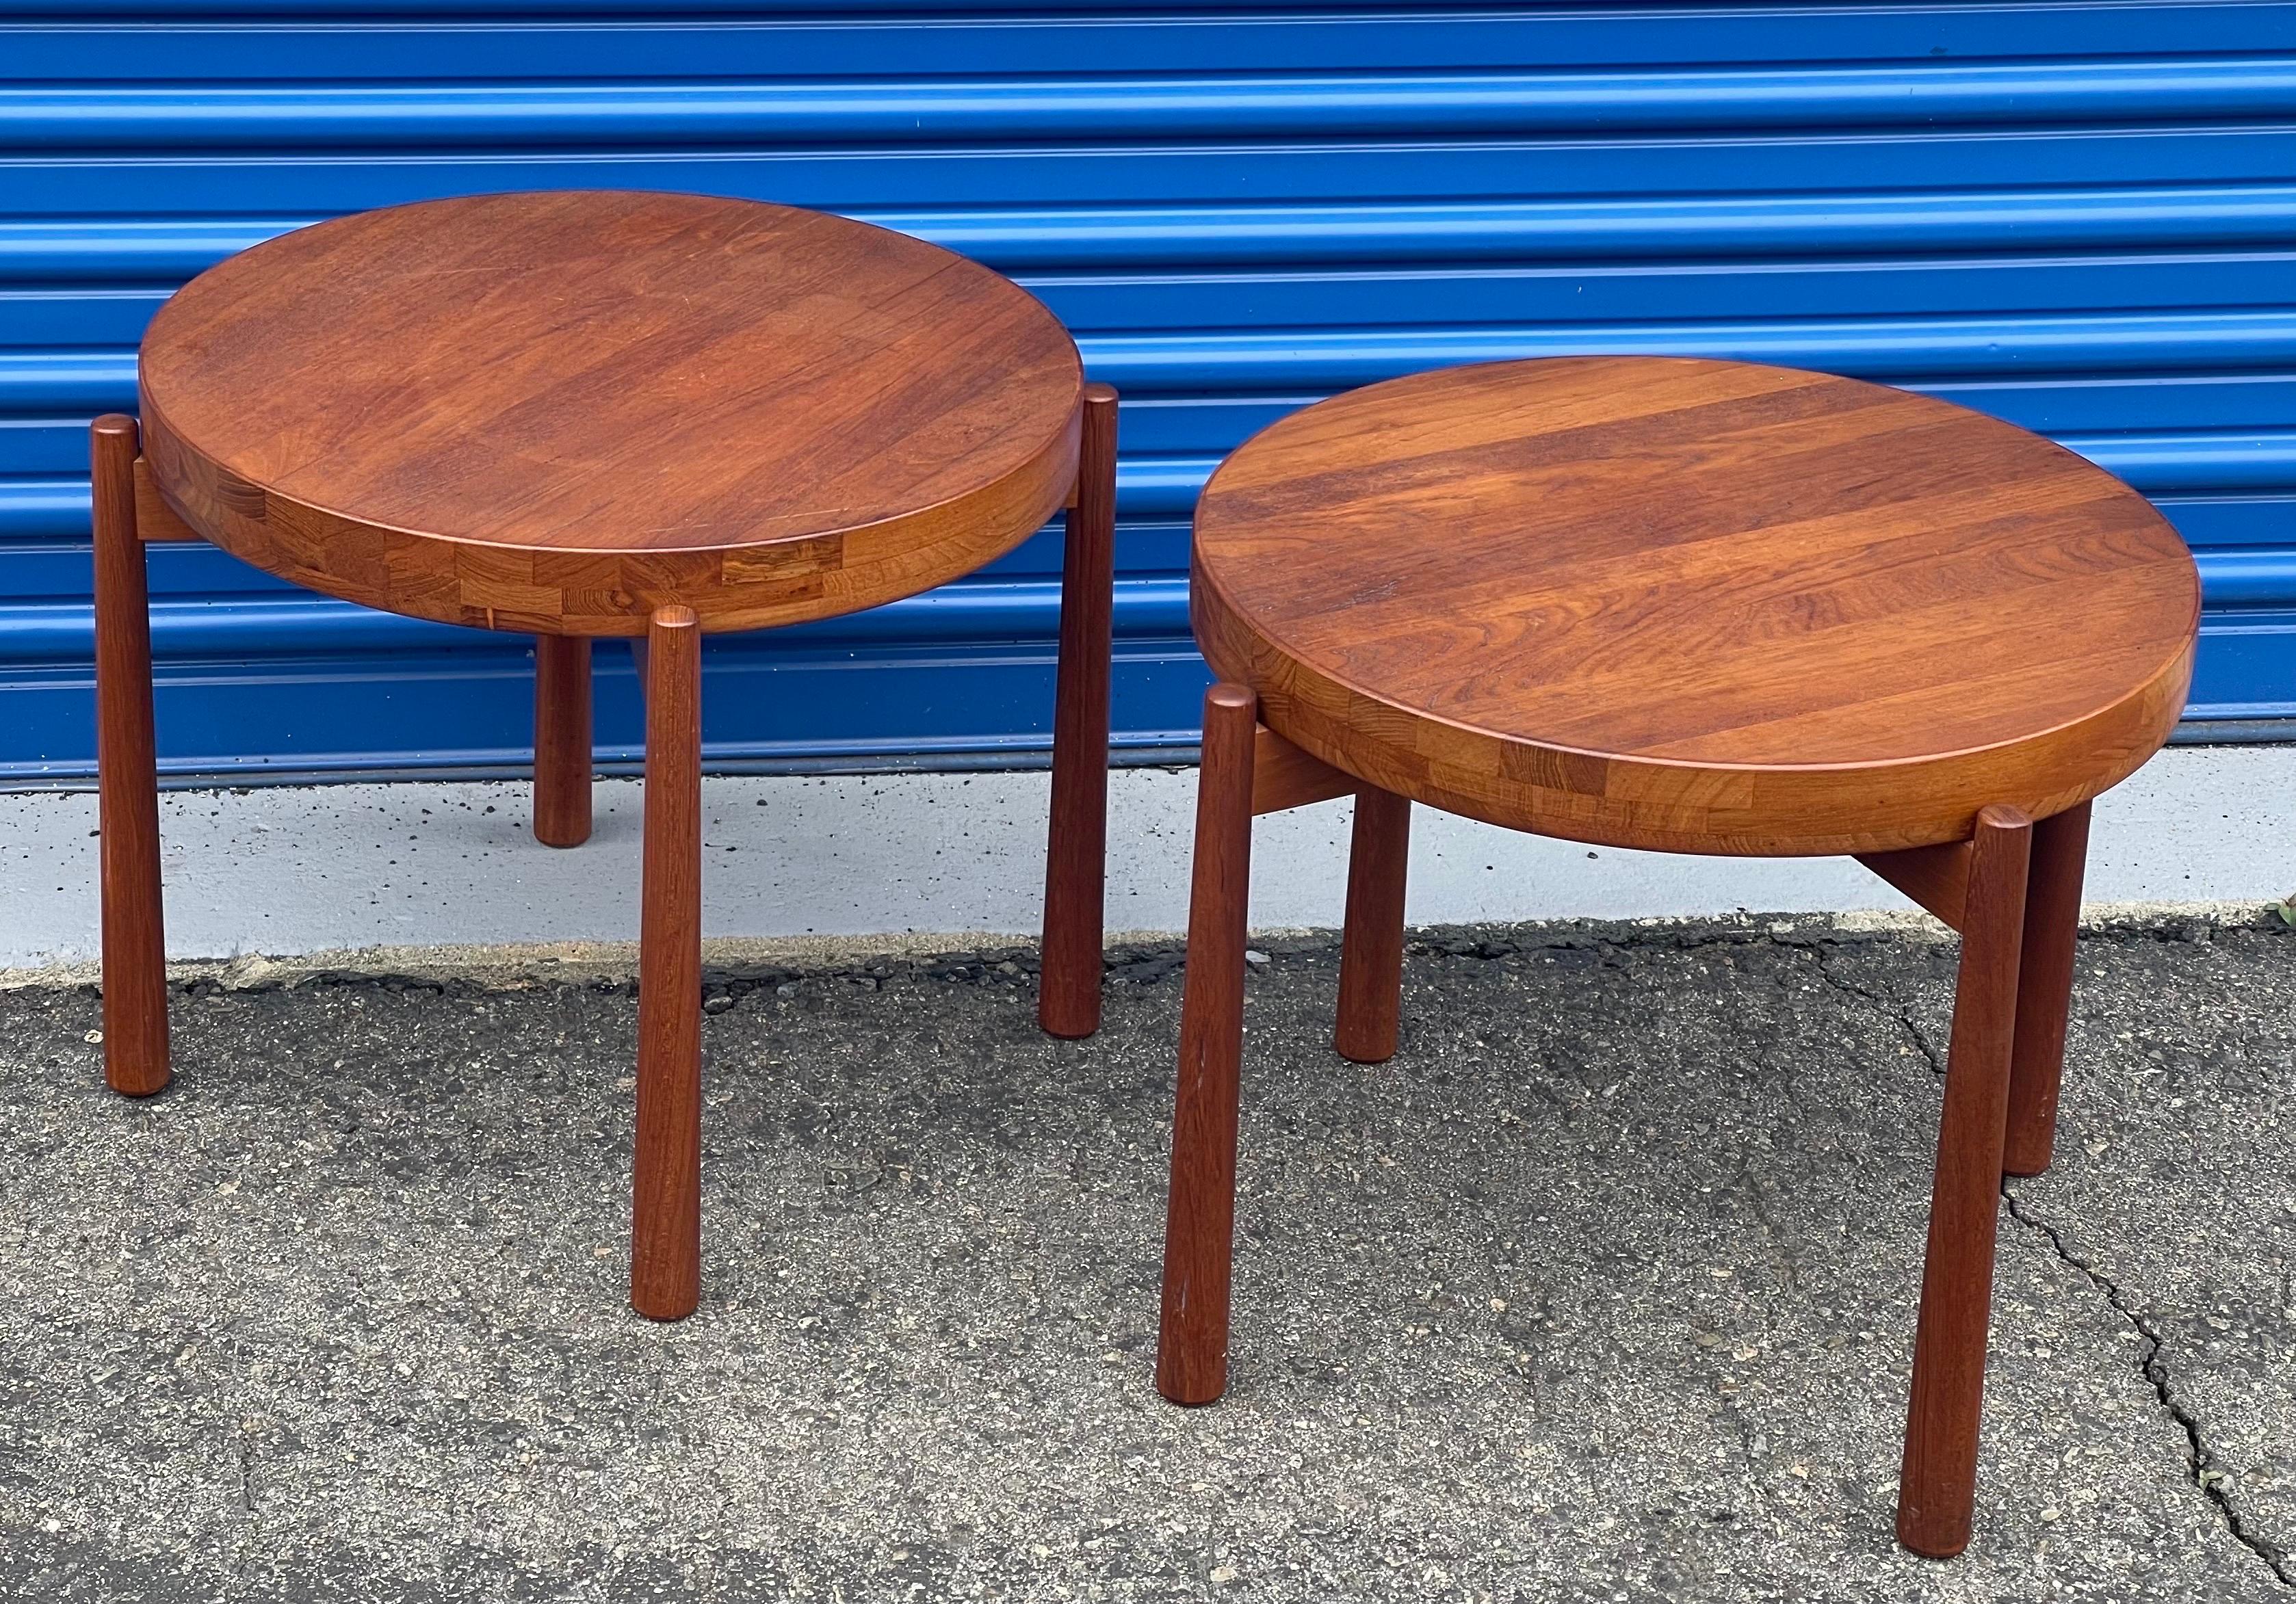 Pair of Teak Tray Side Tables Attributed to Jens Quistgaard for DUX of Sweden For Sale 3